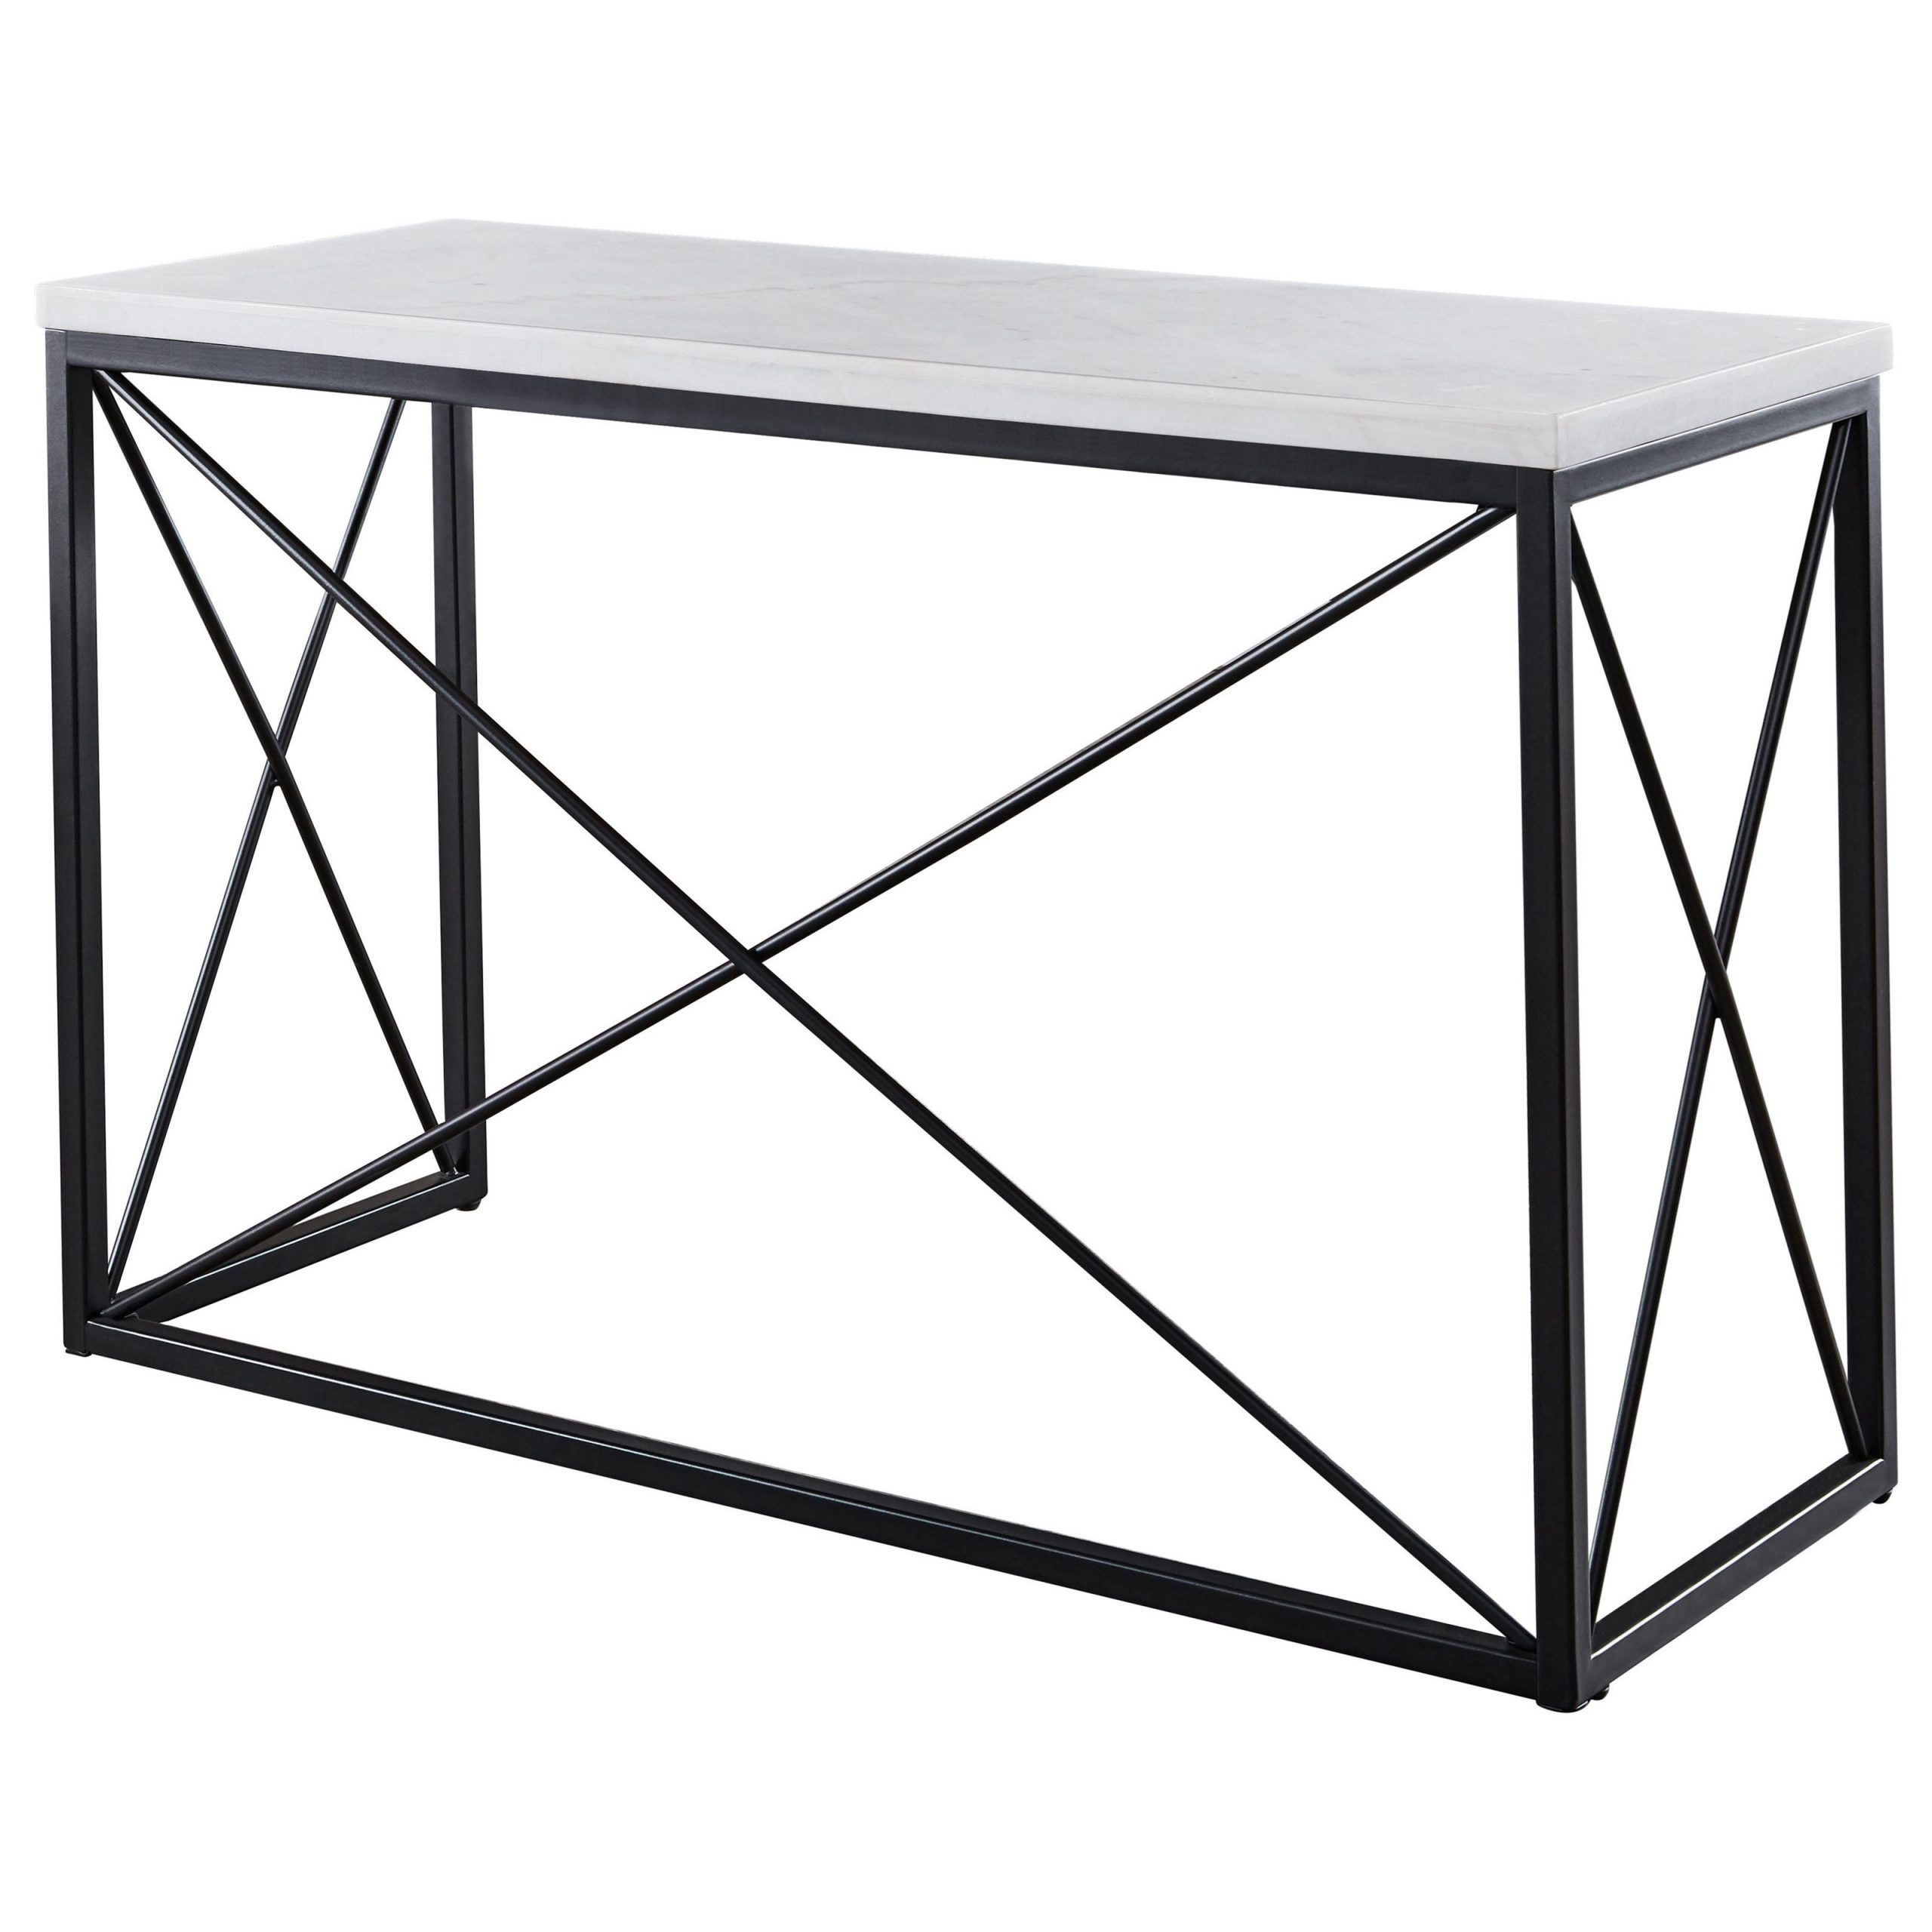 Steve Silver Skyler 1345002 Contemporary White Marble Top Pertaining To 1 Shelf Square Console Tables (View 3 of 20)